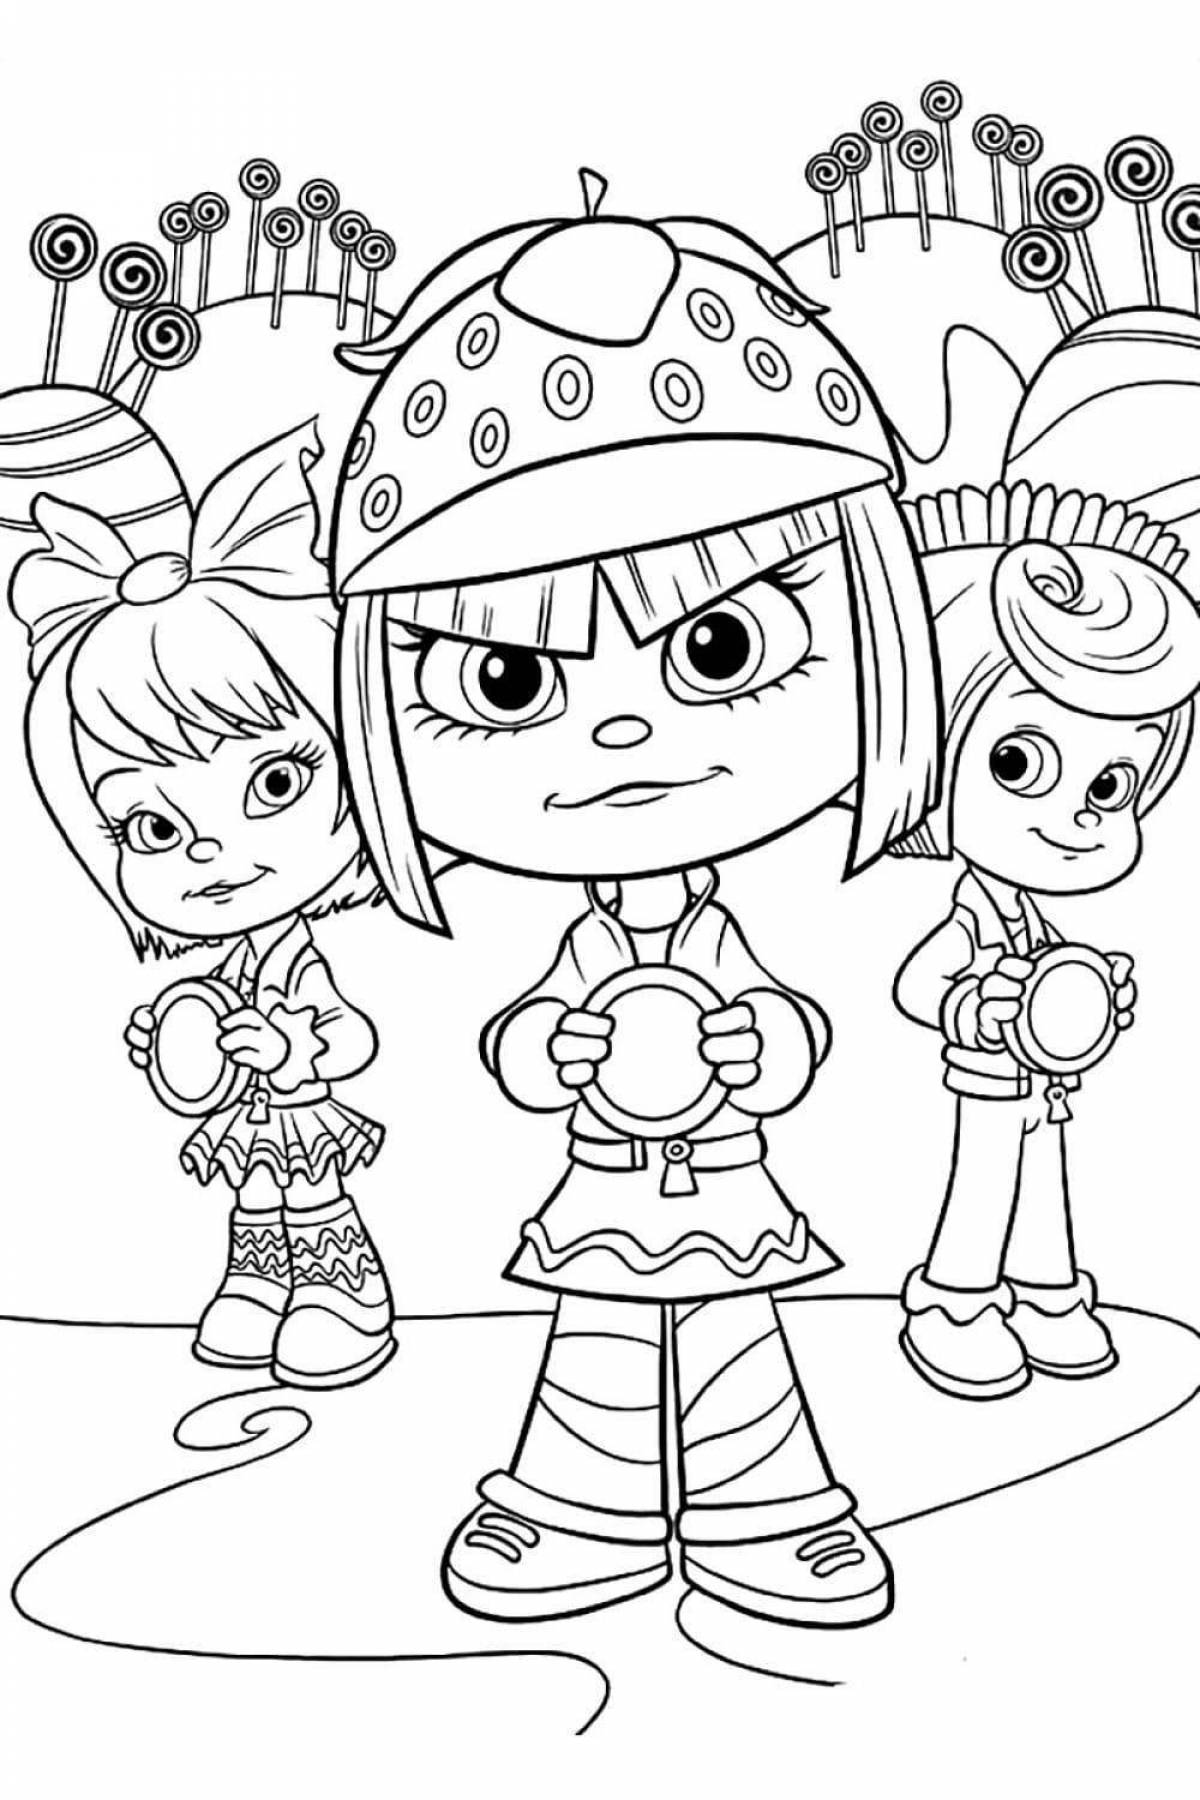 Adorable cartoon girls coloring pages